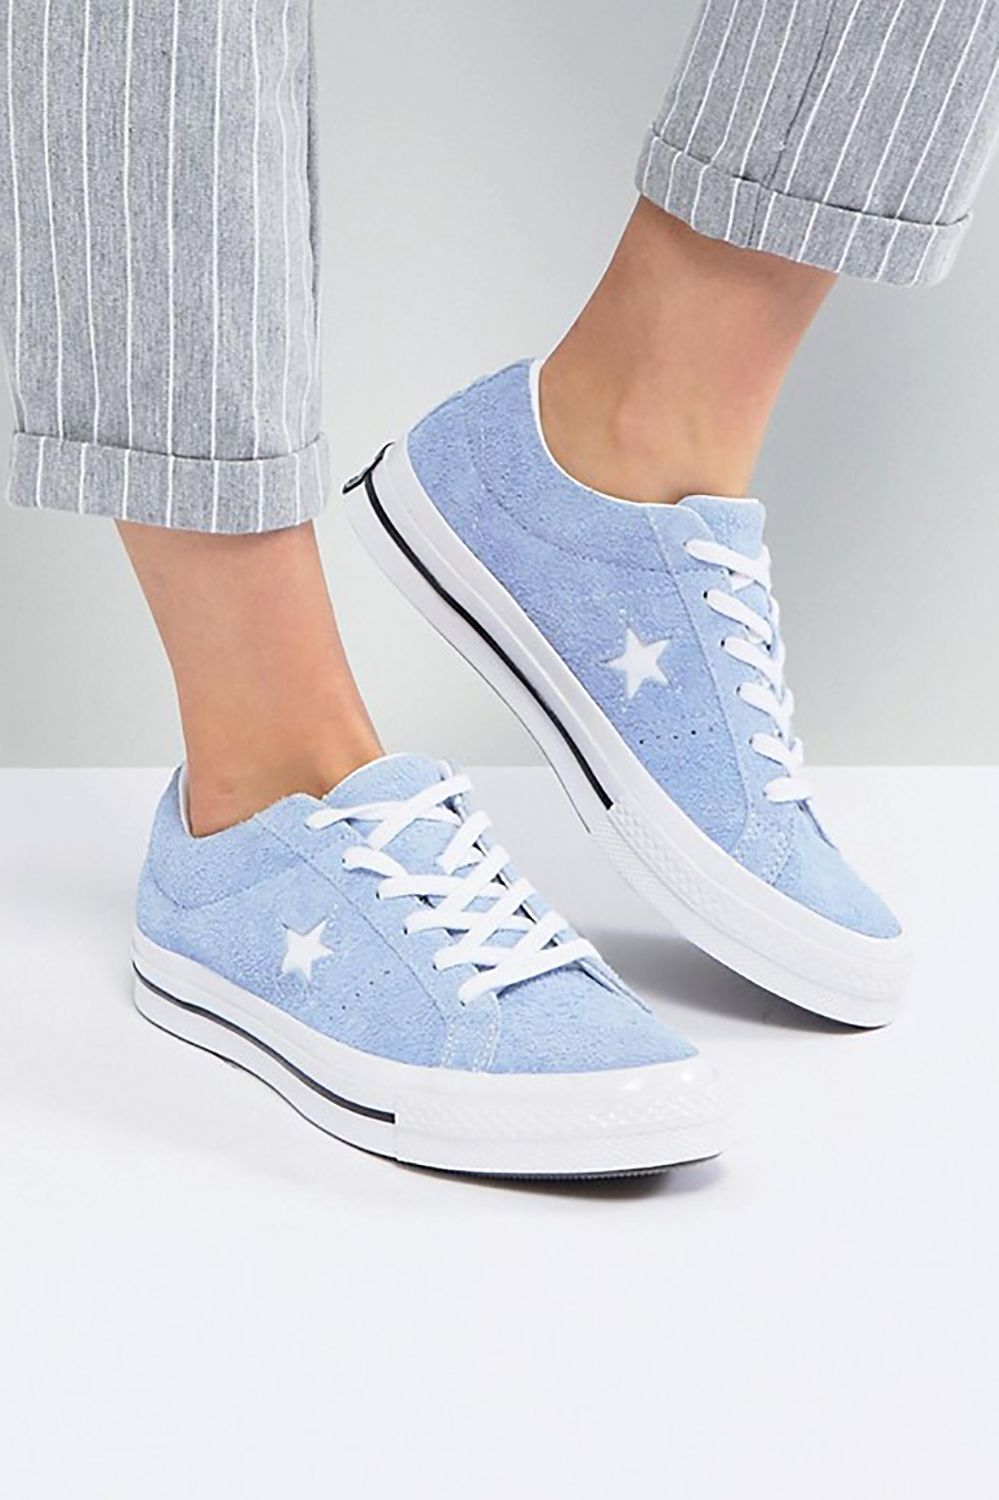 shoes that look both pink and white and blue and gray